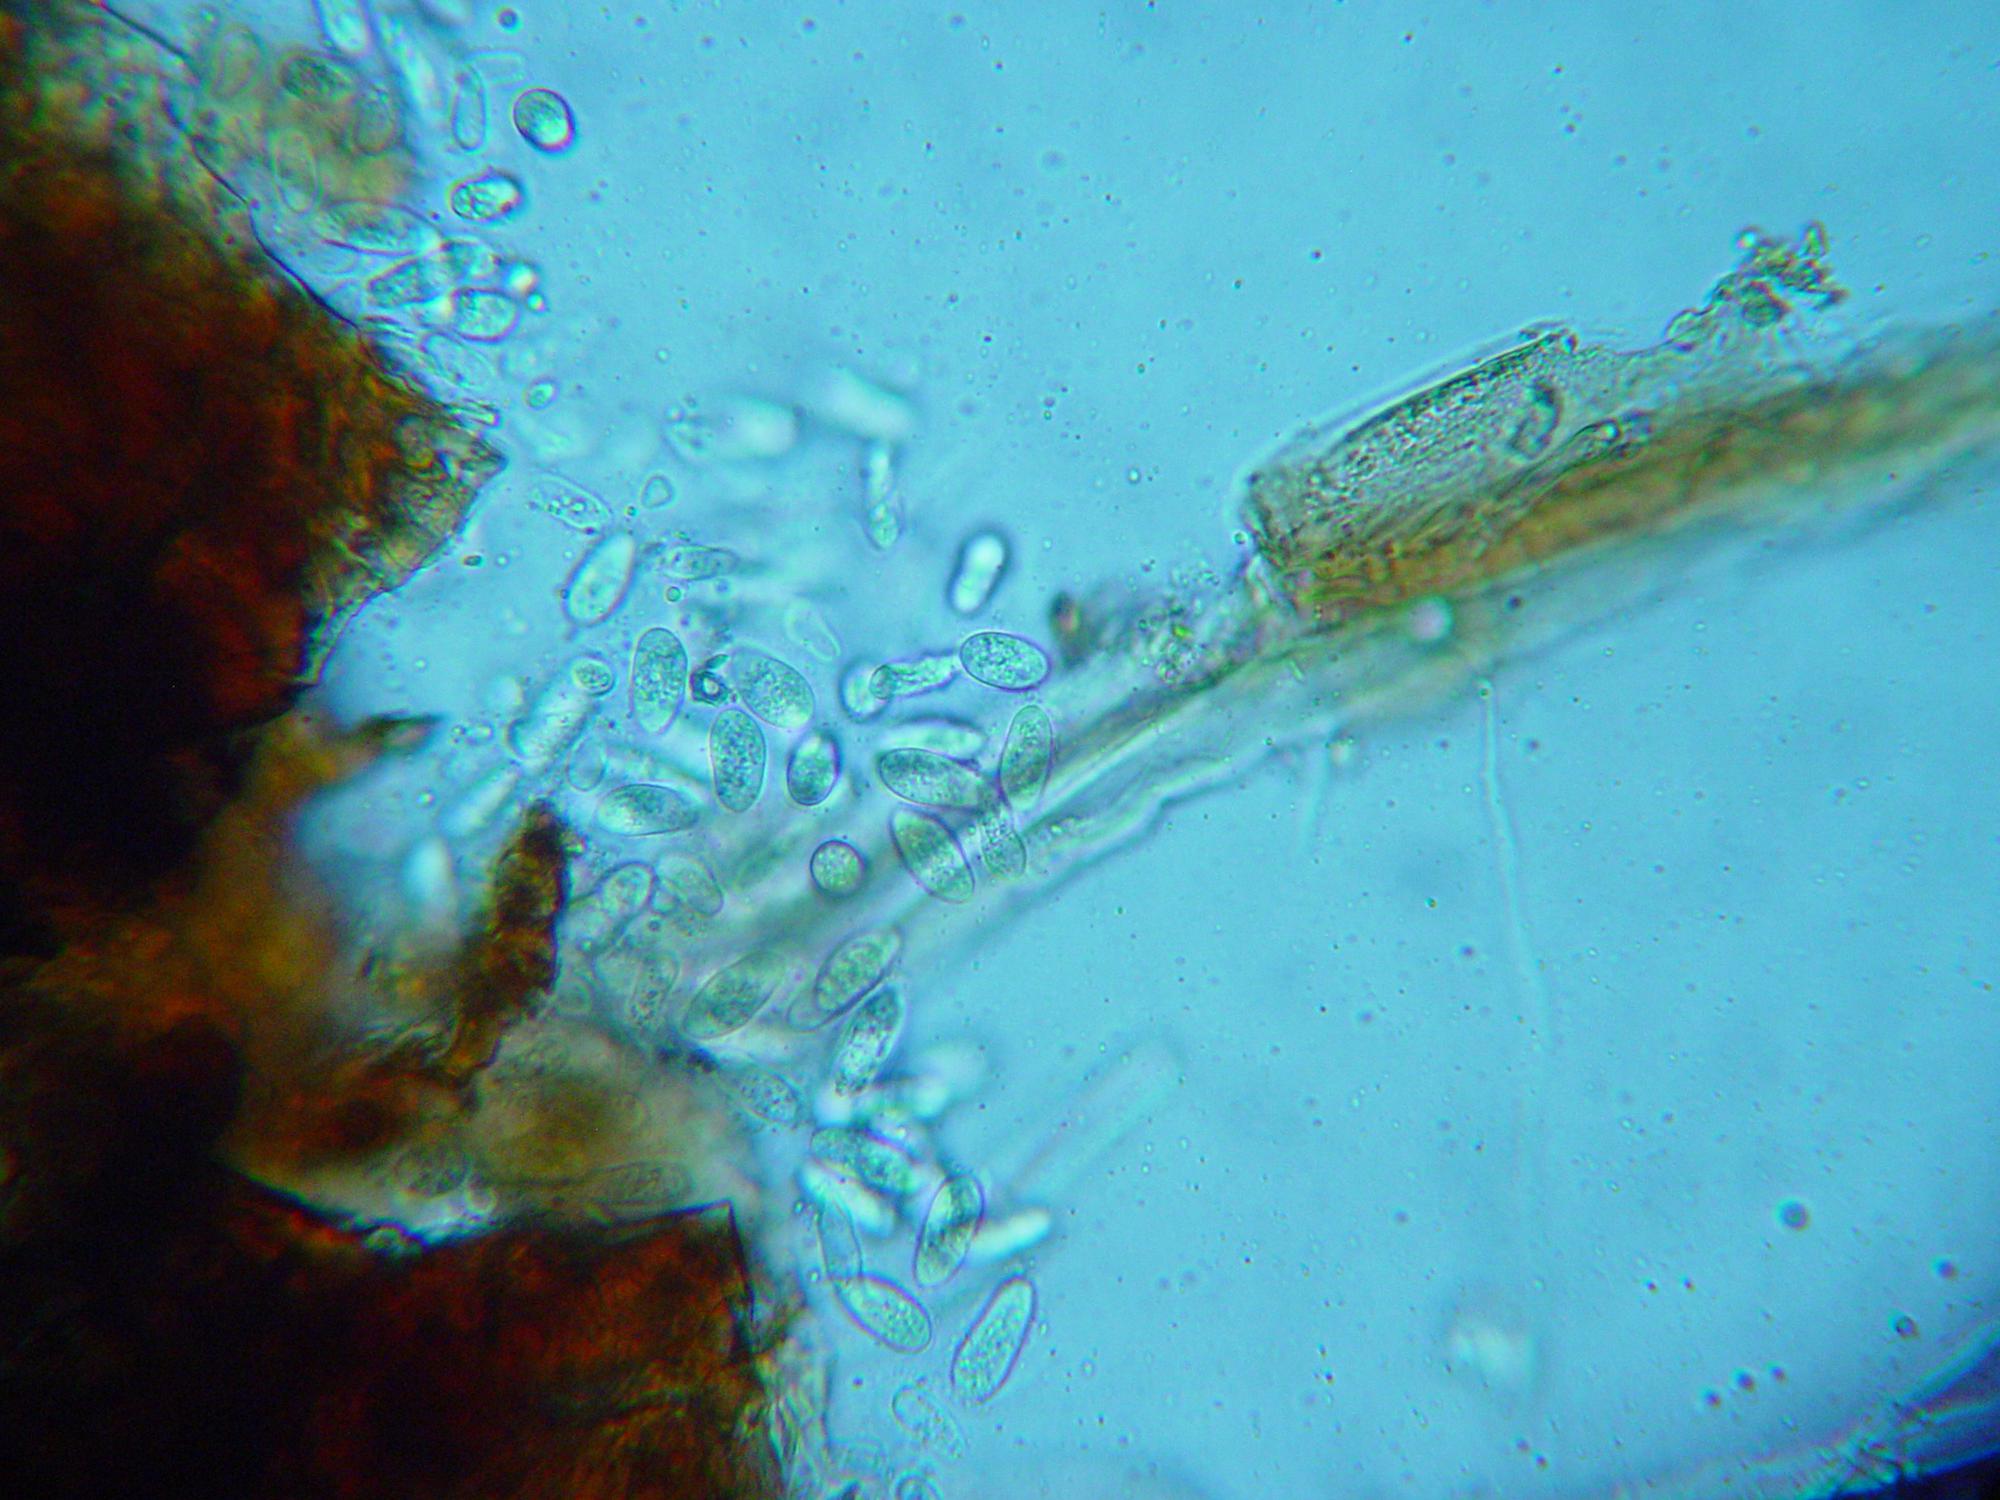 Spores of the Macrophomina phaseolina pathogen can be seen as transparent ovals in this microscopic image taken from an infected corn plant. (Photo by MSU Extension Service/ Clarissa Balbalian)